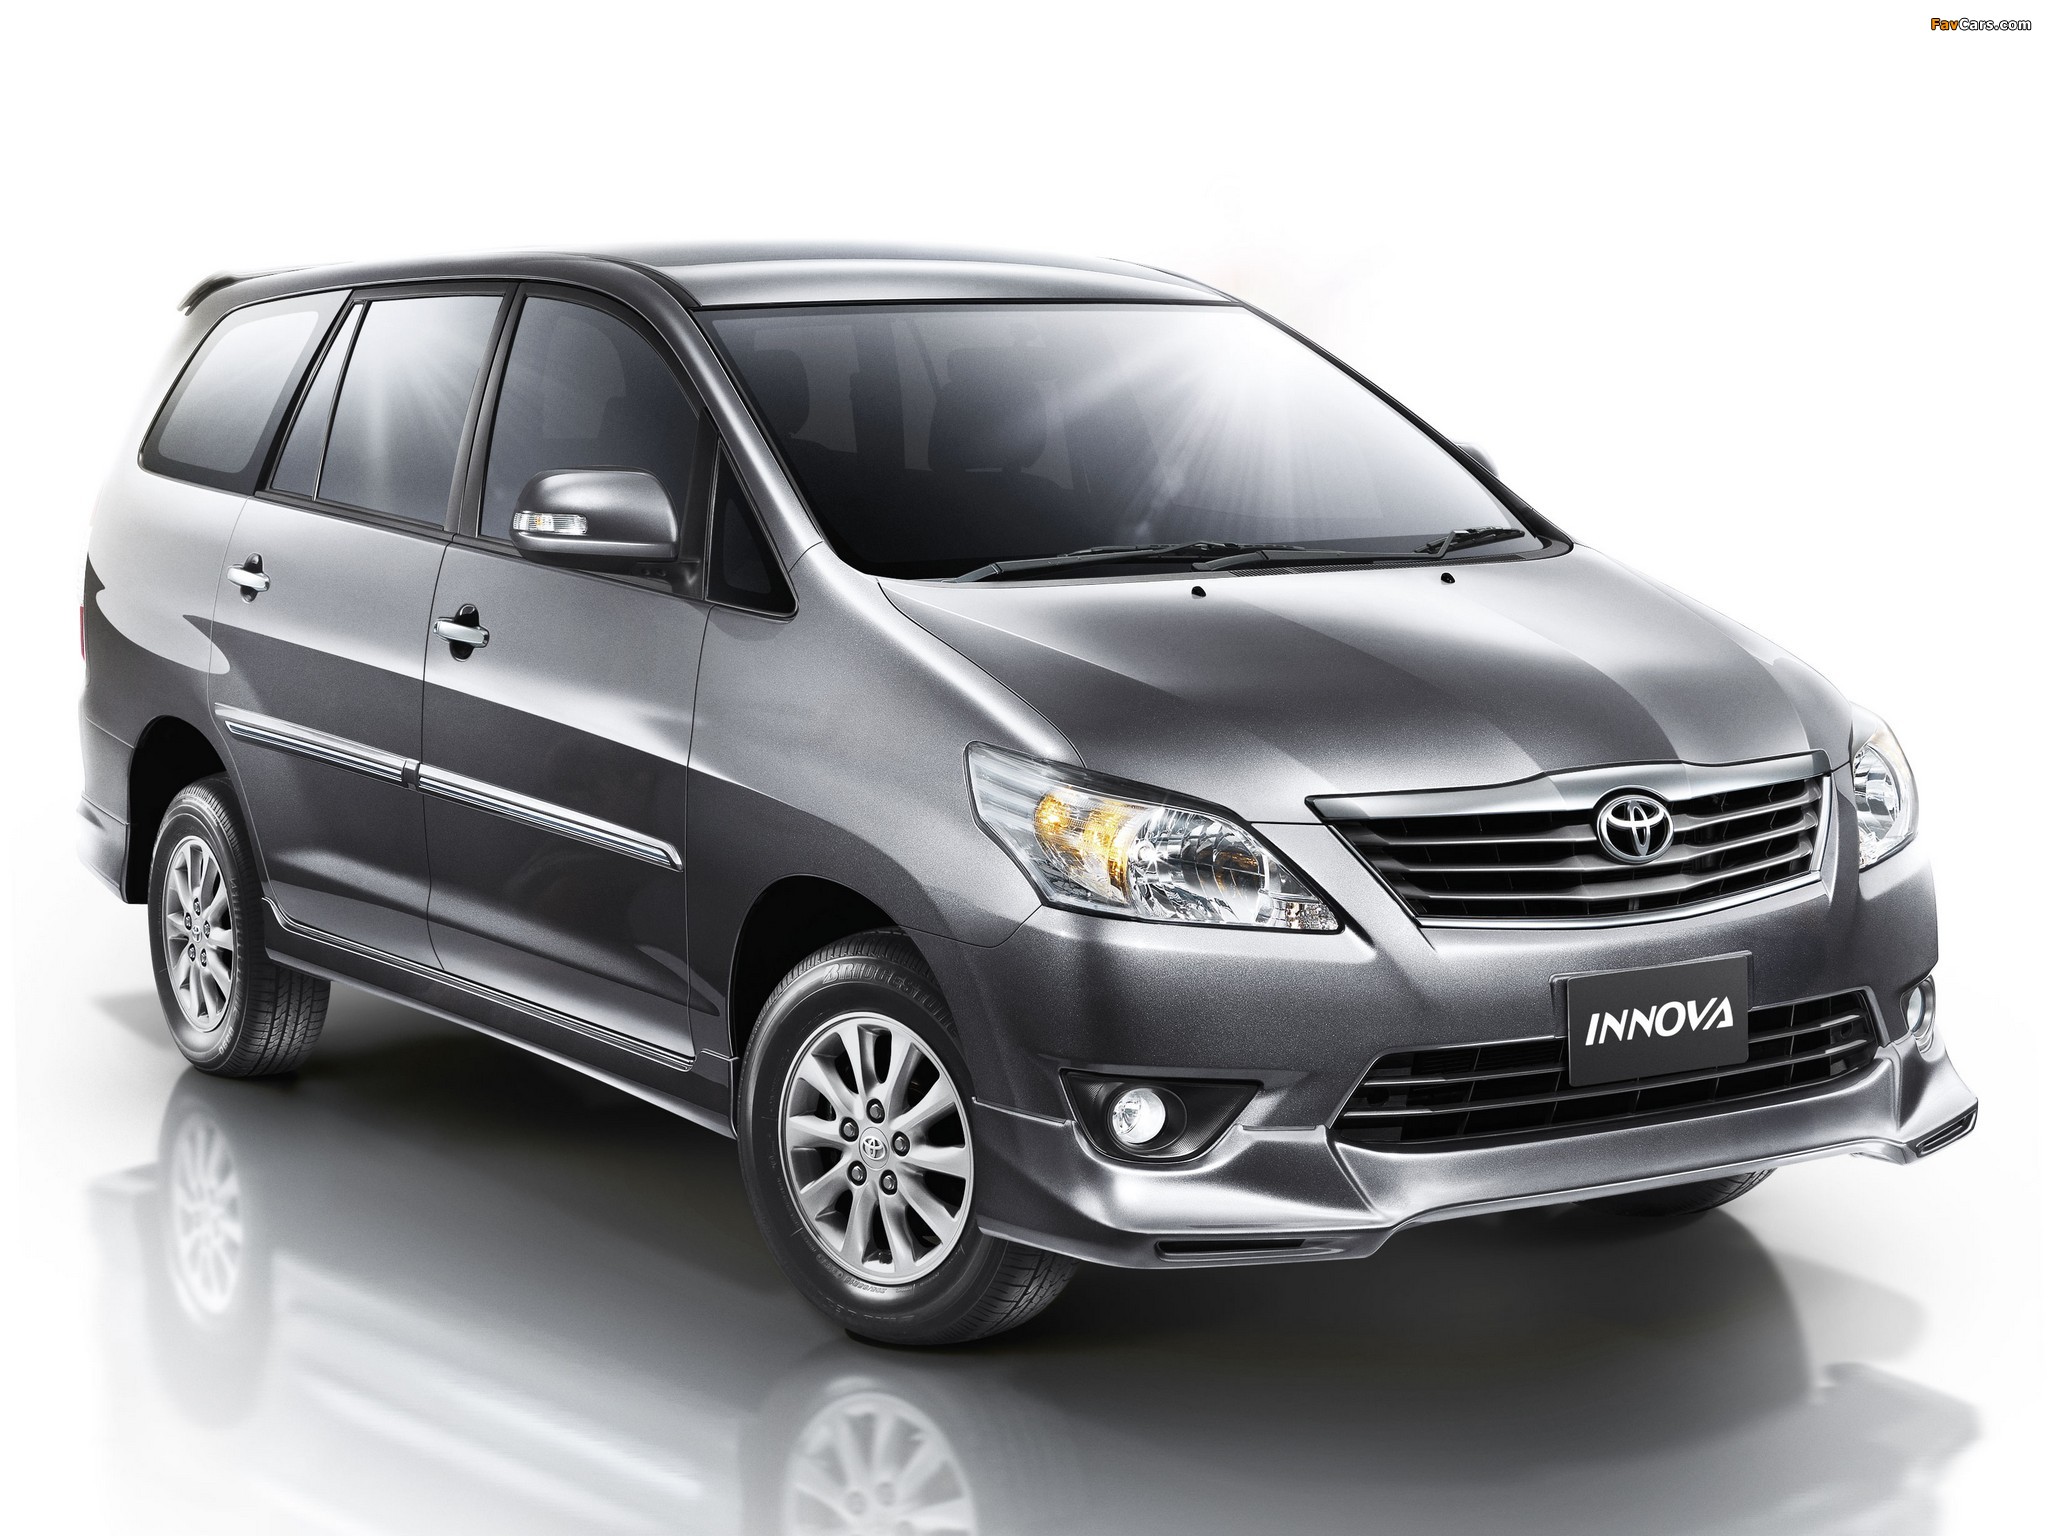 Innova Images Wallpapers